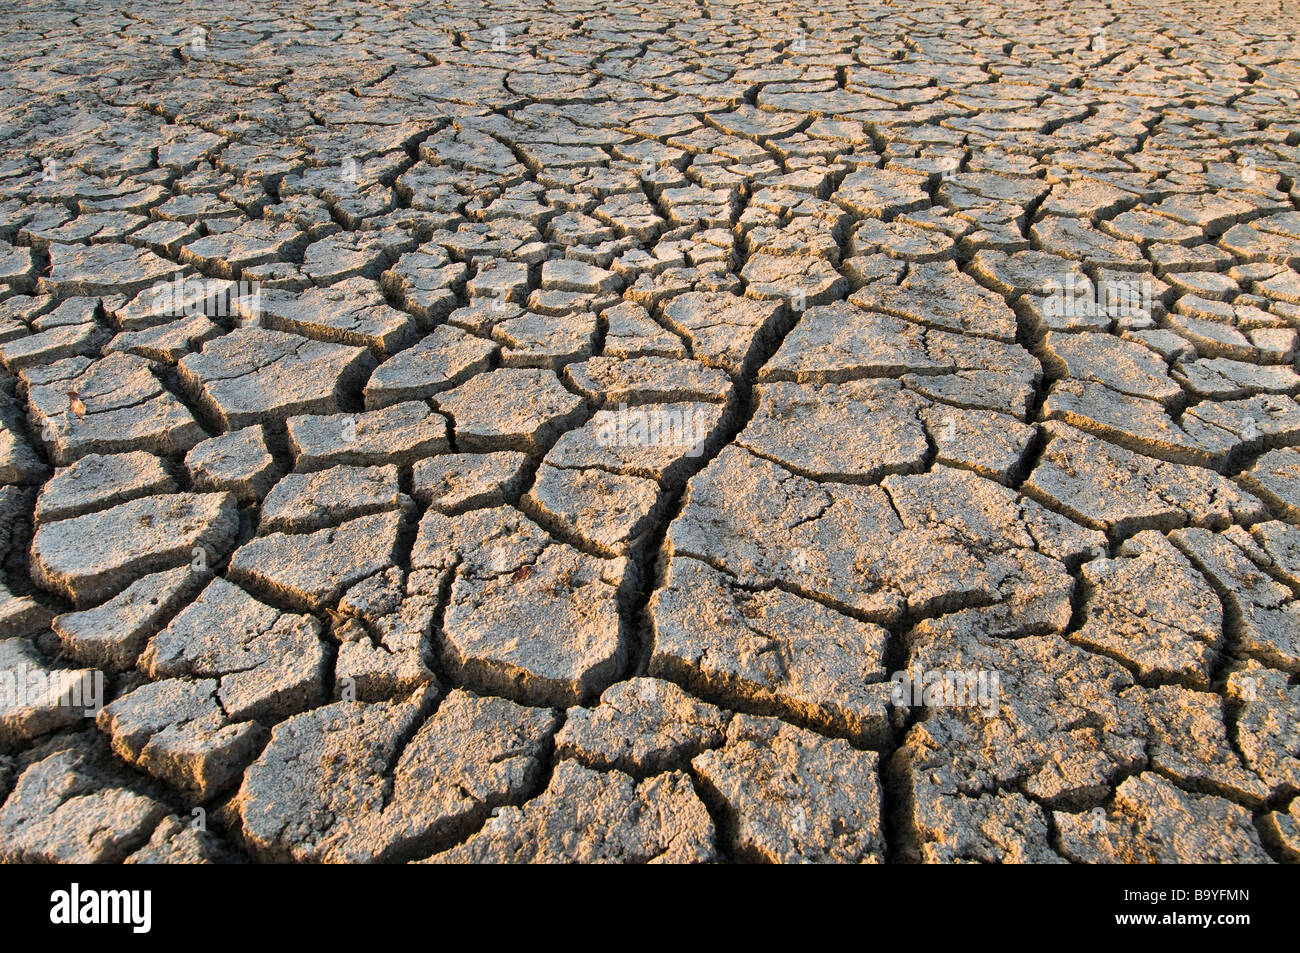 Cracked earth during extended dry season replaces pond, Everglades National Park, Florida Stock Photo